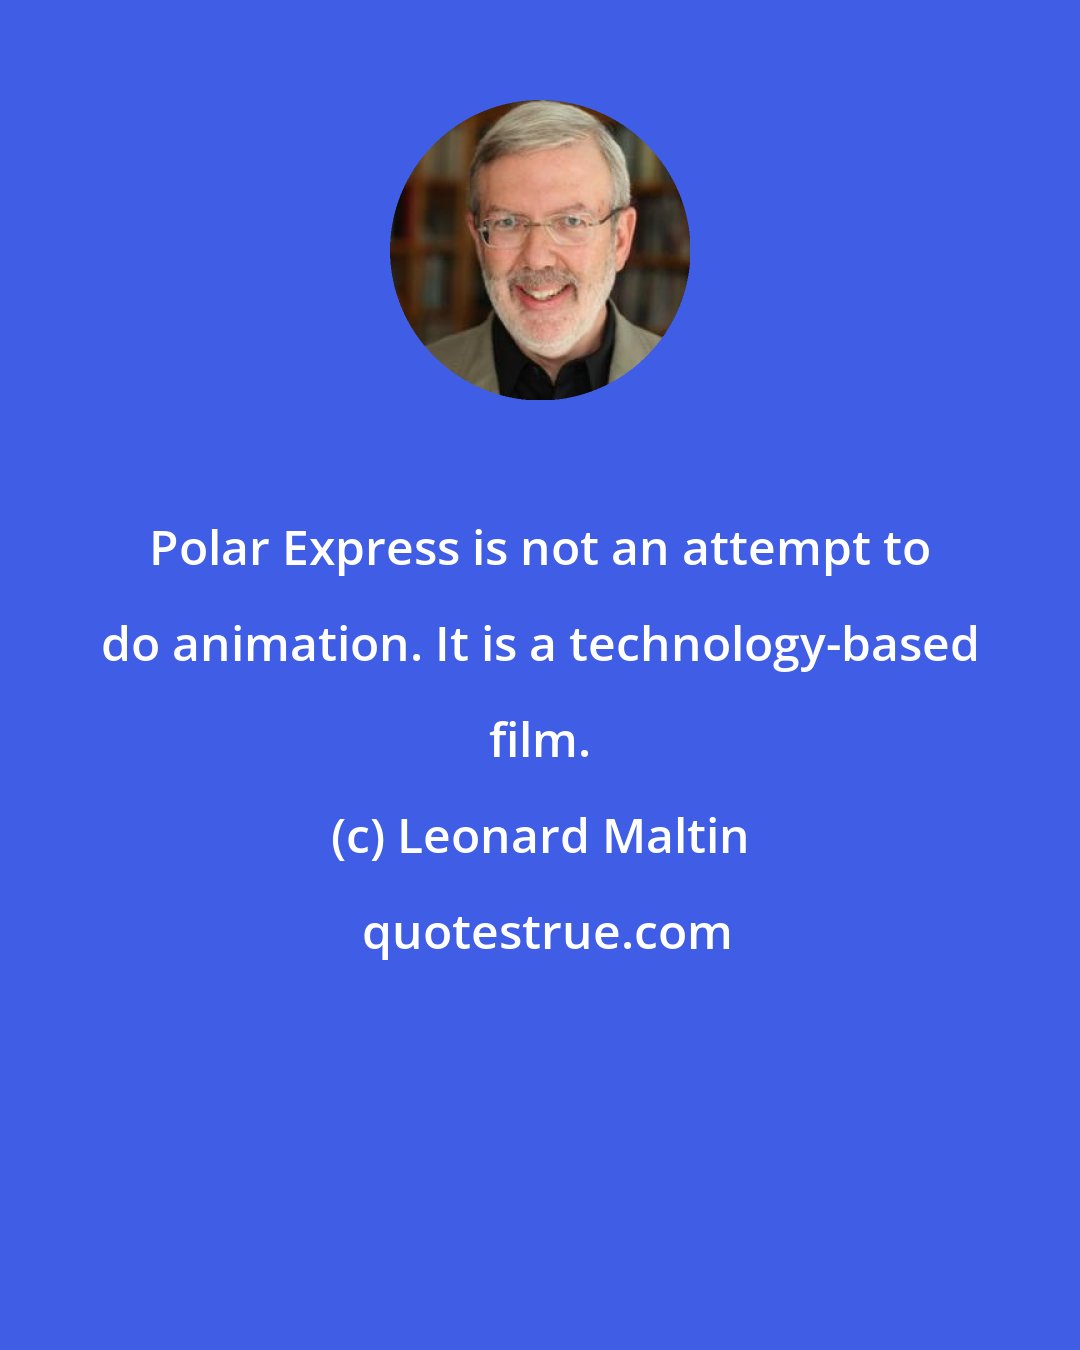 Leonard Maltin: Polar Express is not an attempt to do animation. It is a technology-based film.